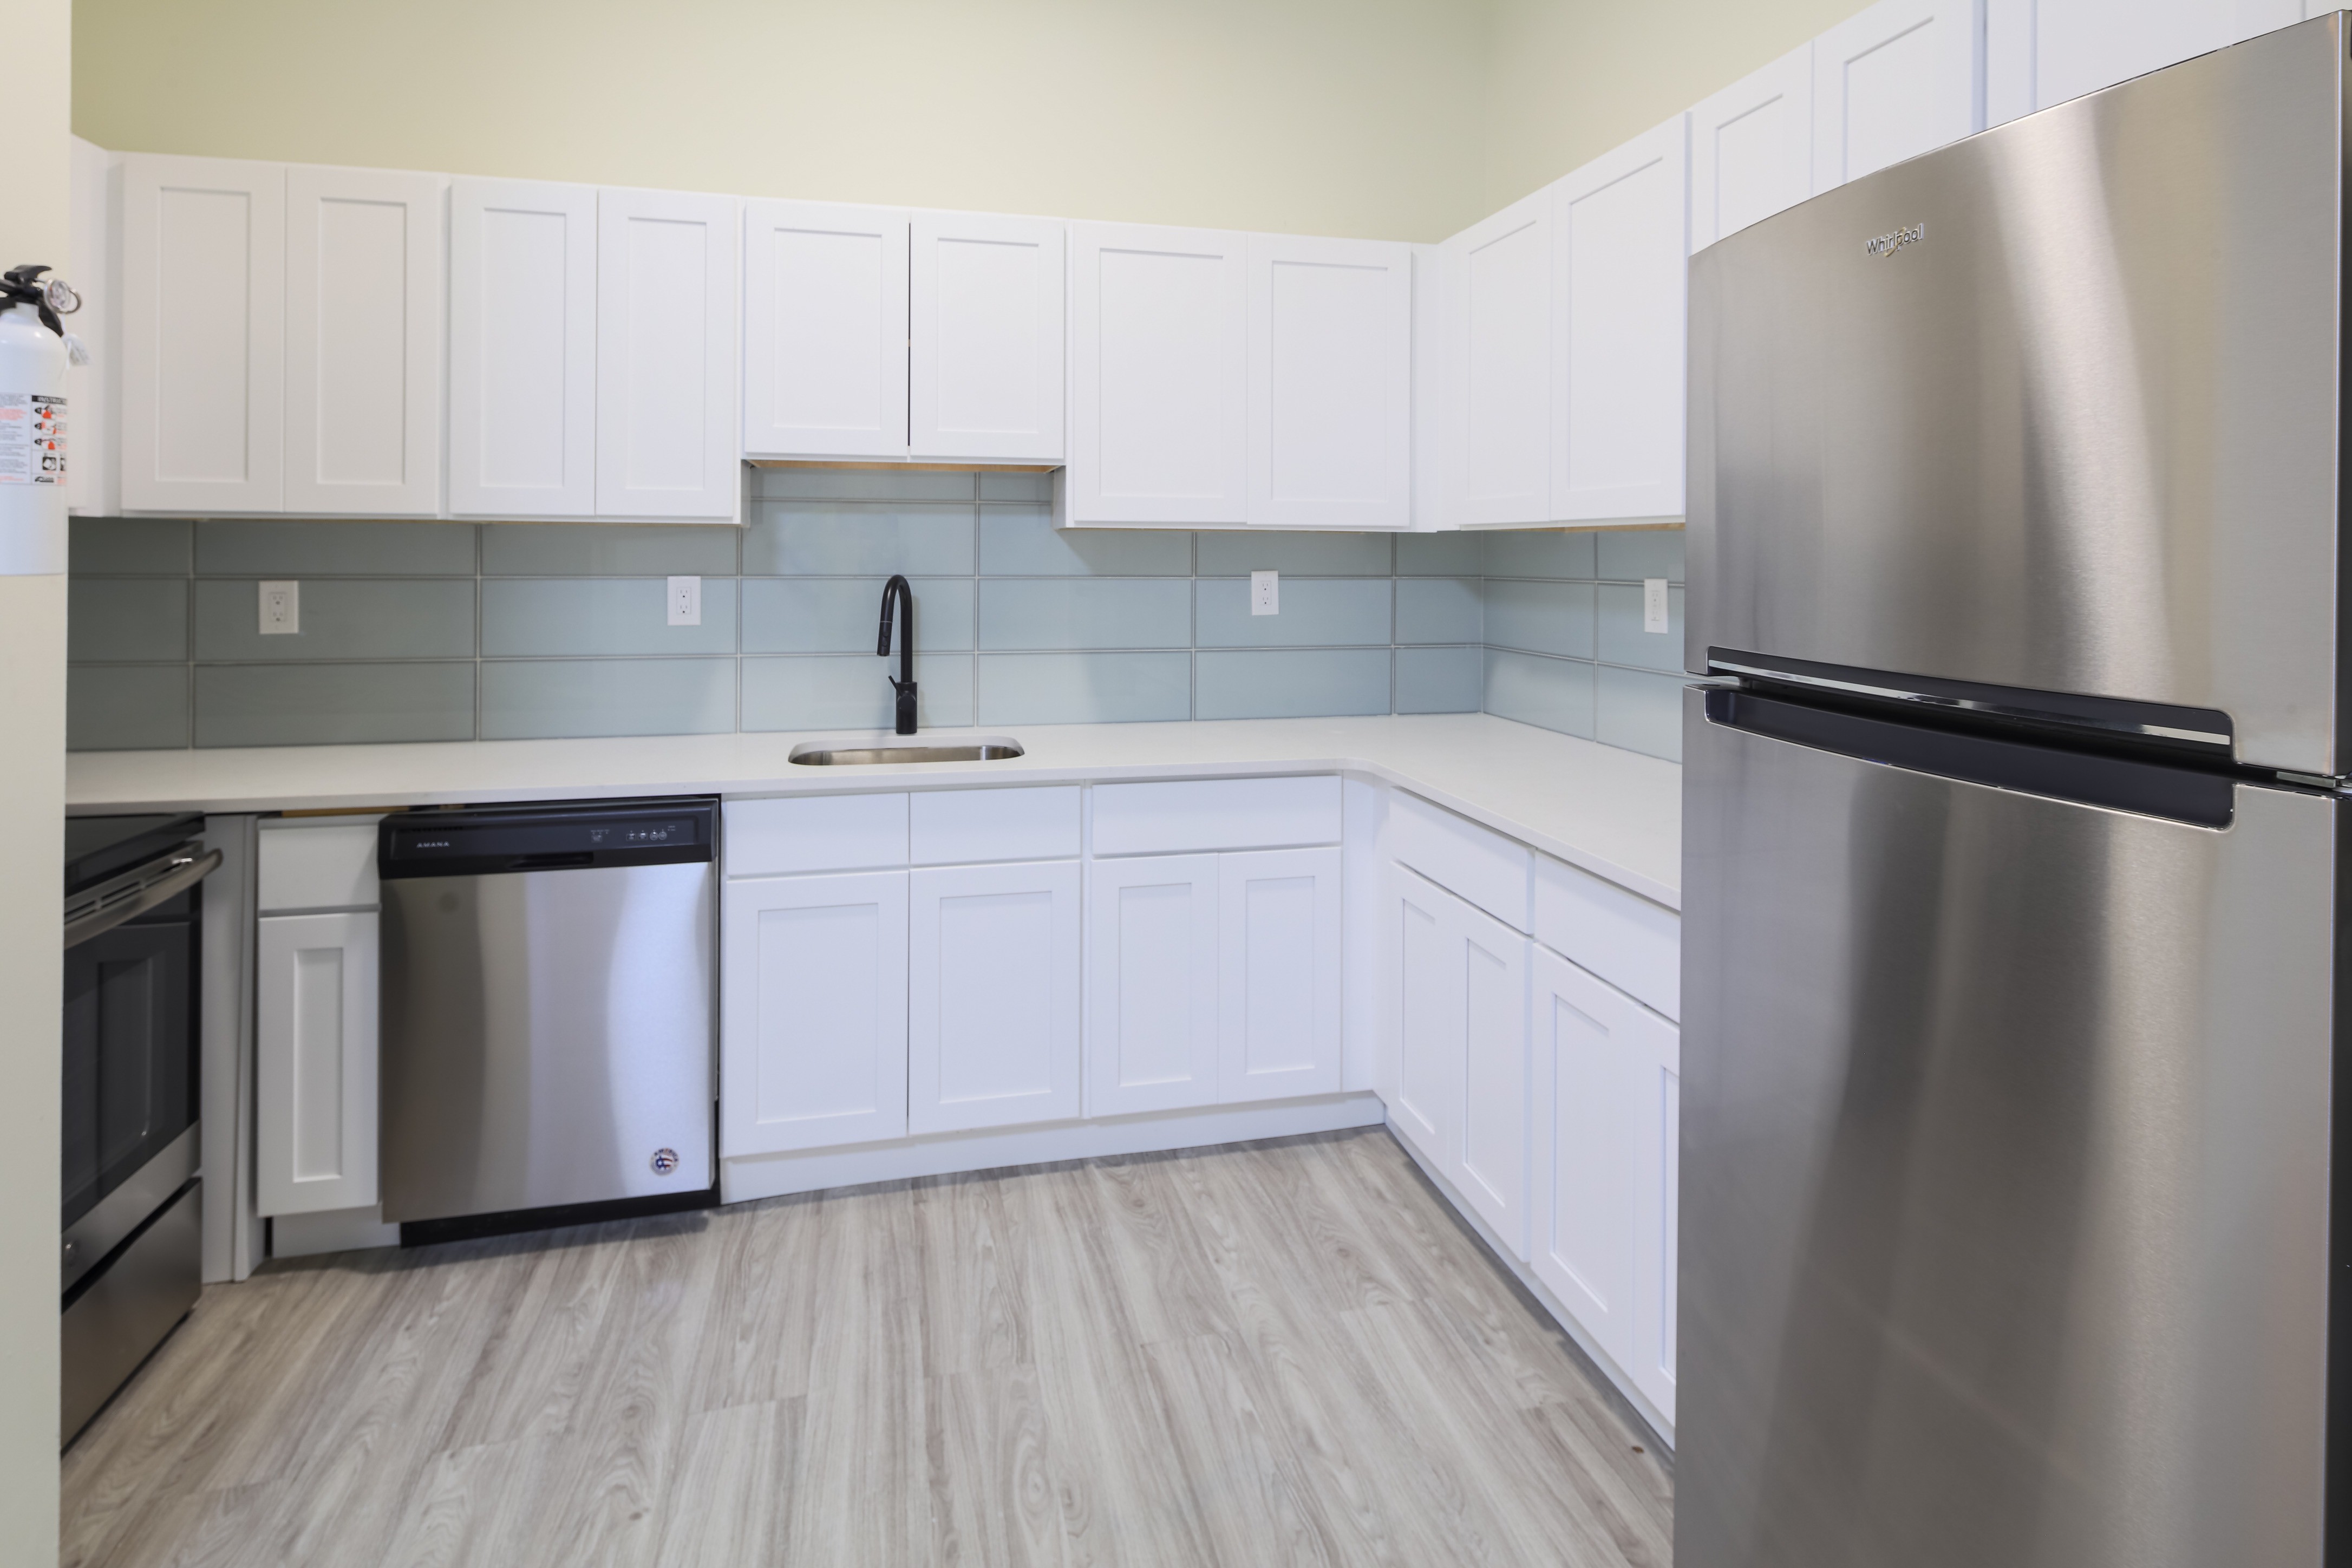 Fully Equipped Kitchen at The Warehouse Apartments in Somerville, New Jersey